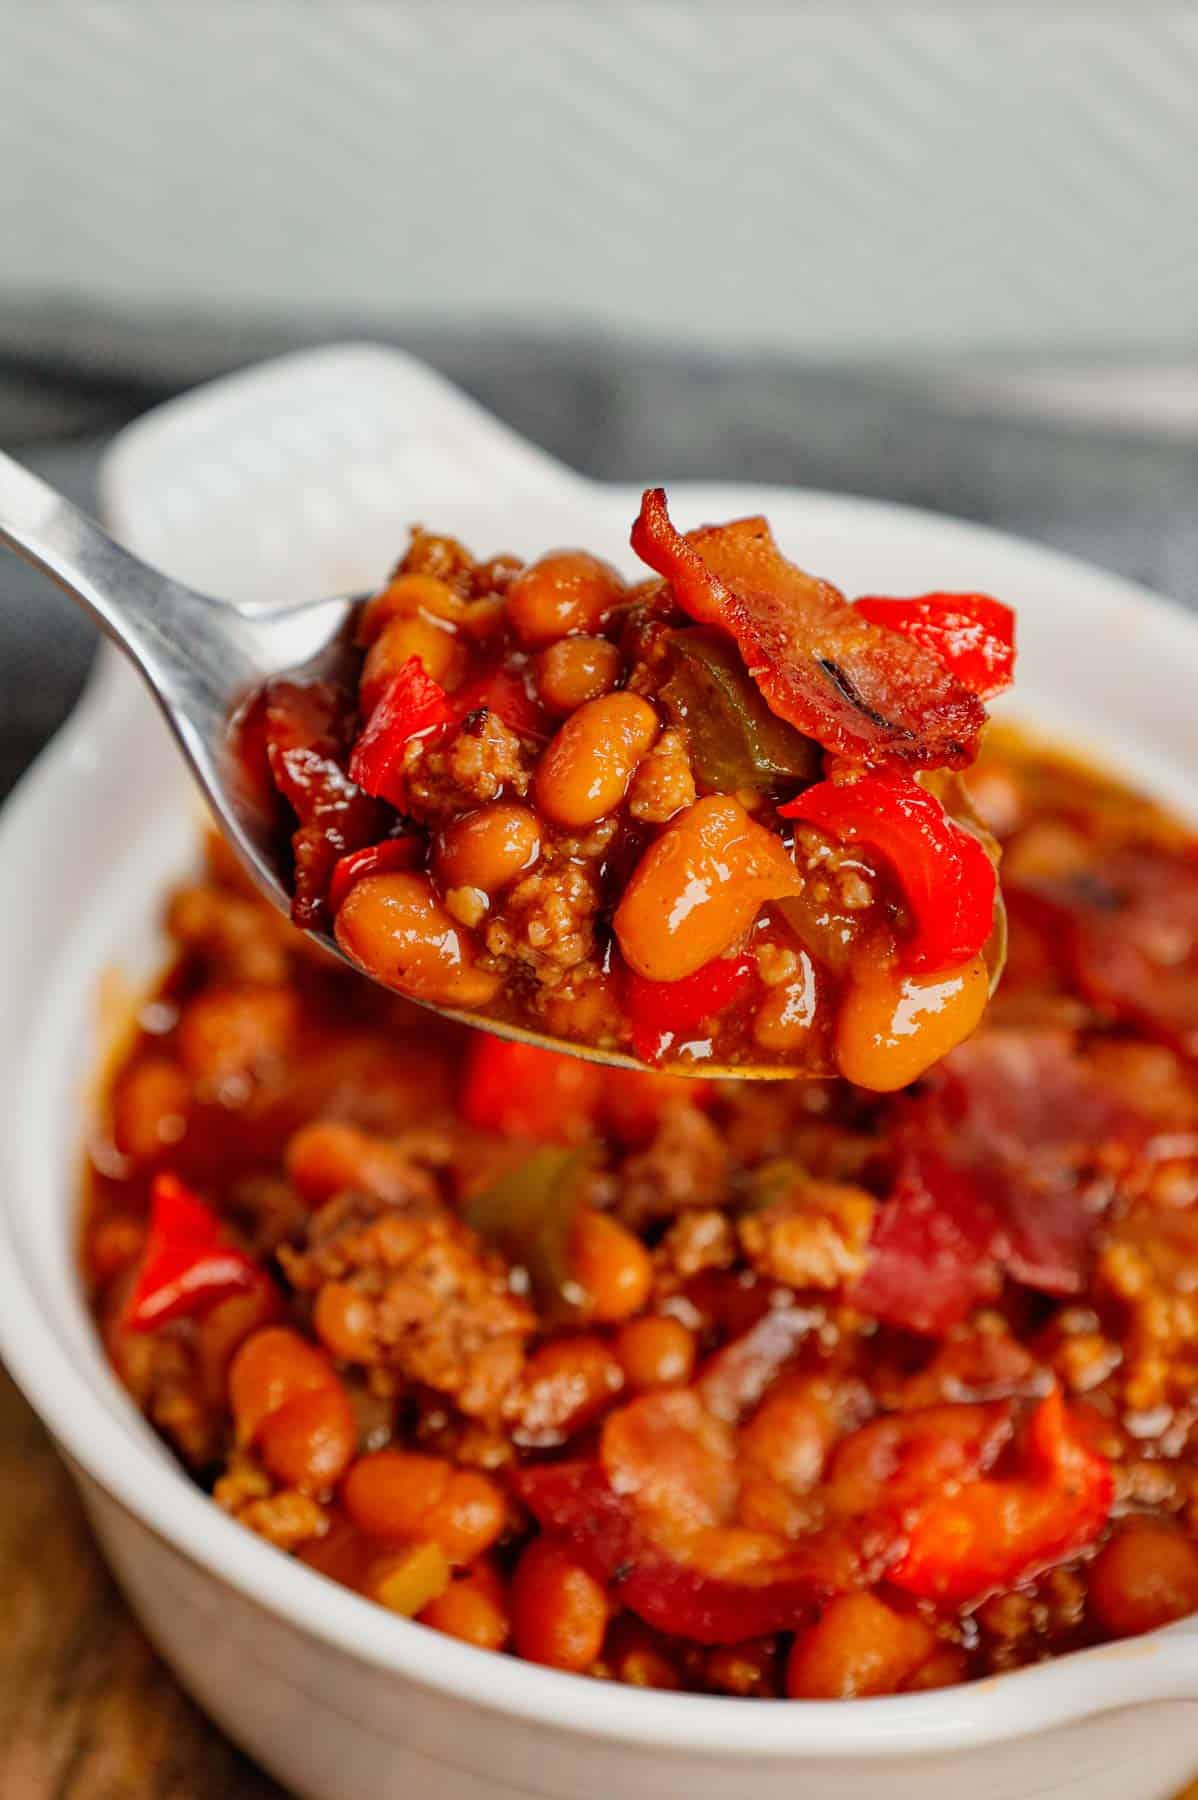 Baked Beans with Ground Beef is a hearty dinner recipe loaded with red and green bell peppers, onions, bacon and Bush's Original baked beans all baked together in a sweet and savoury barbecue sauce.